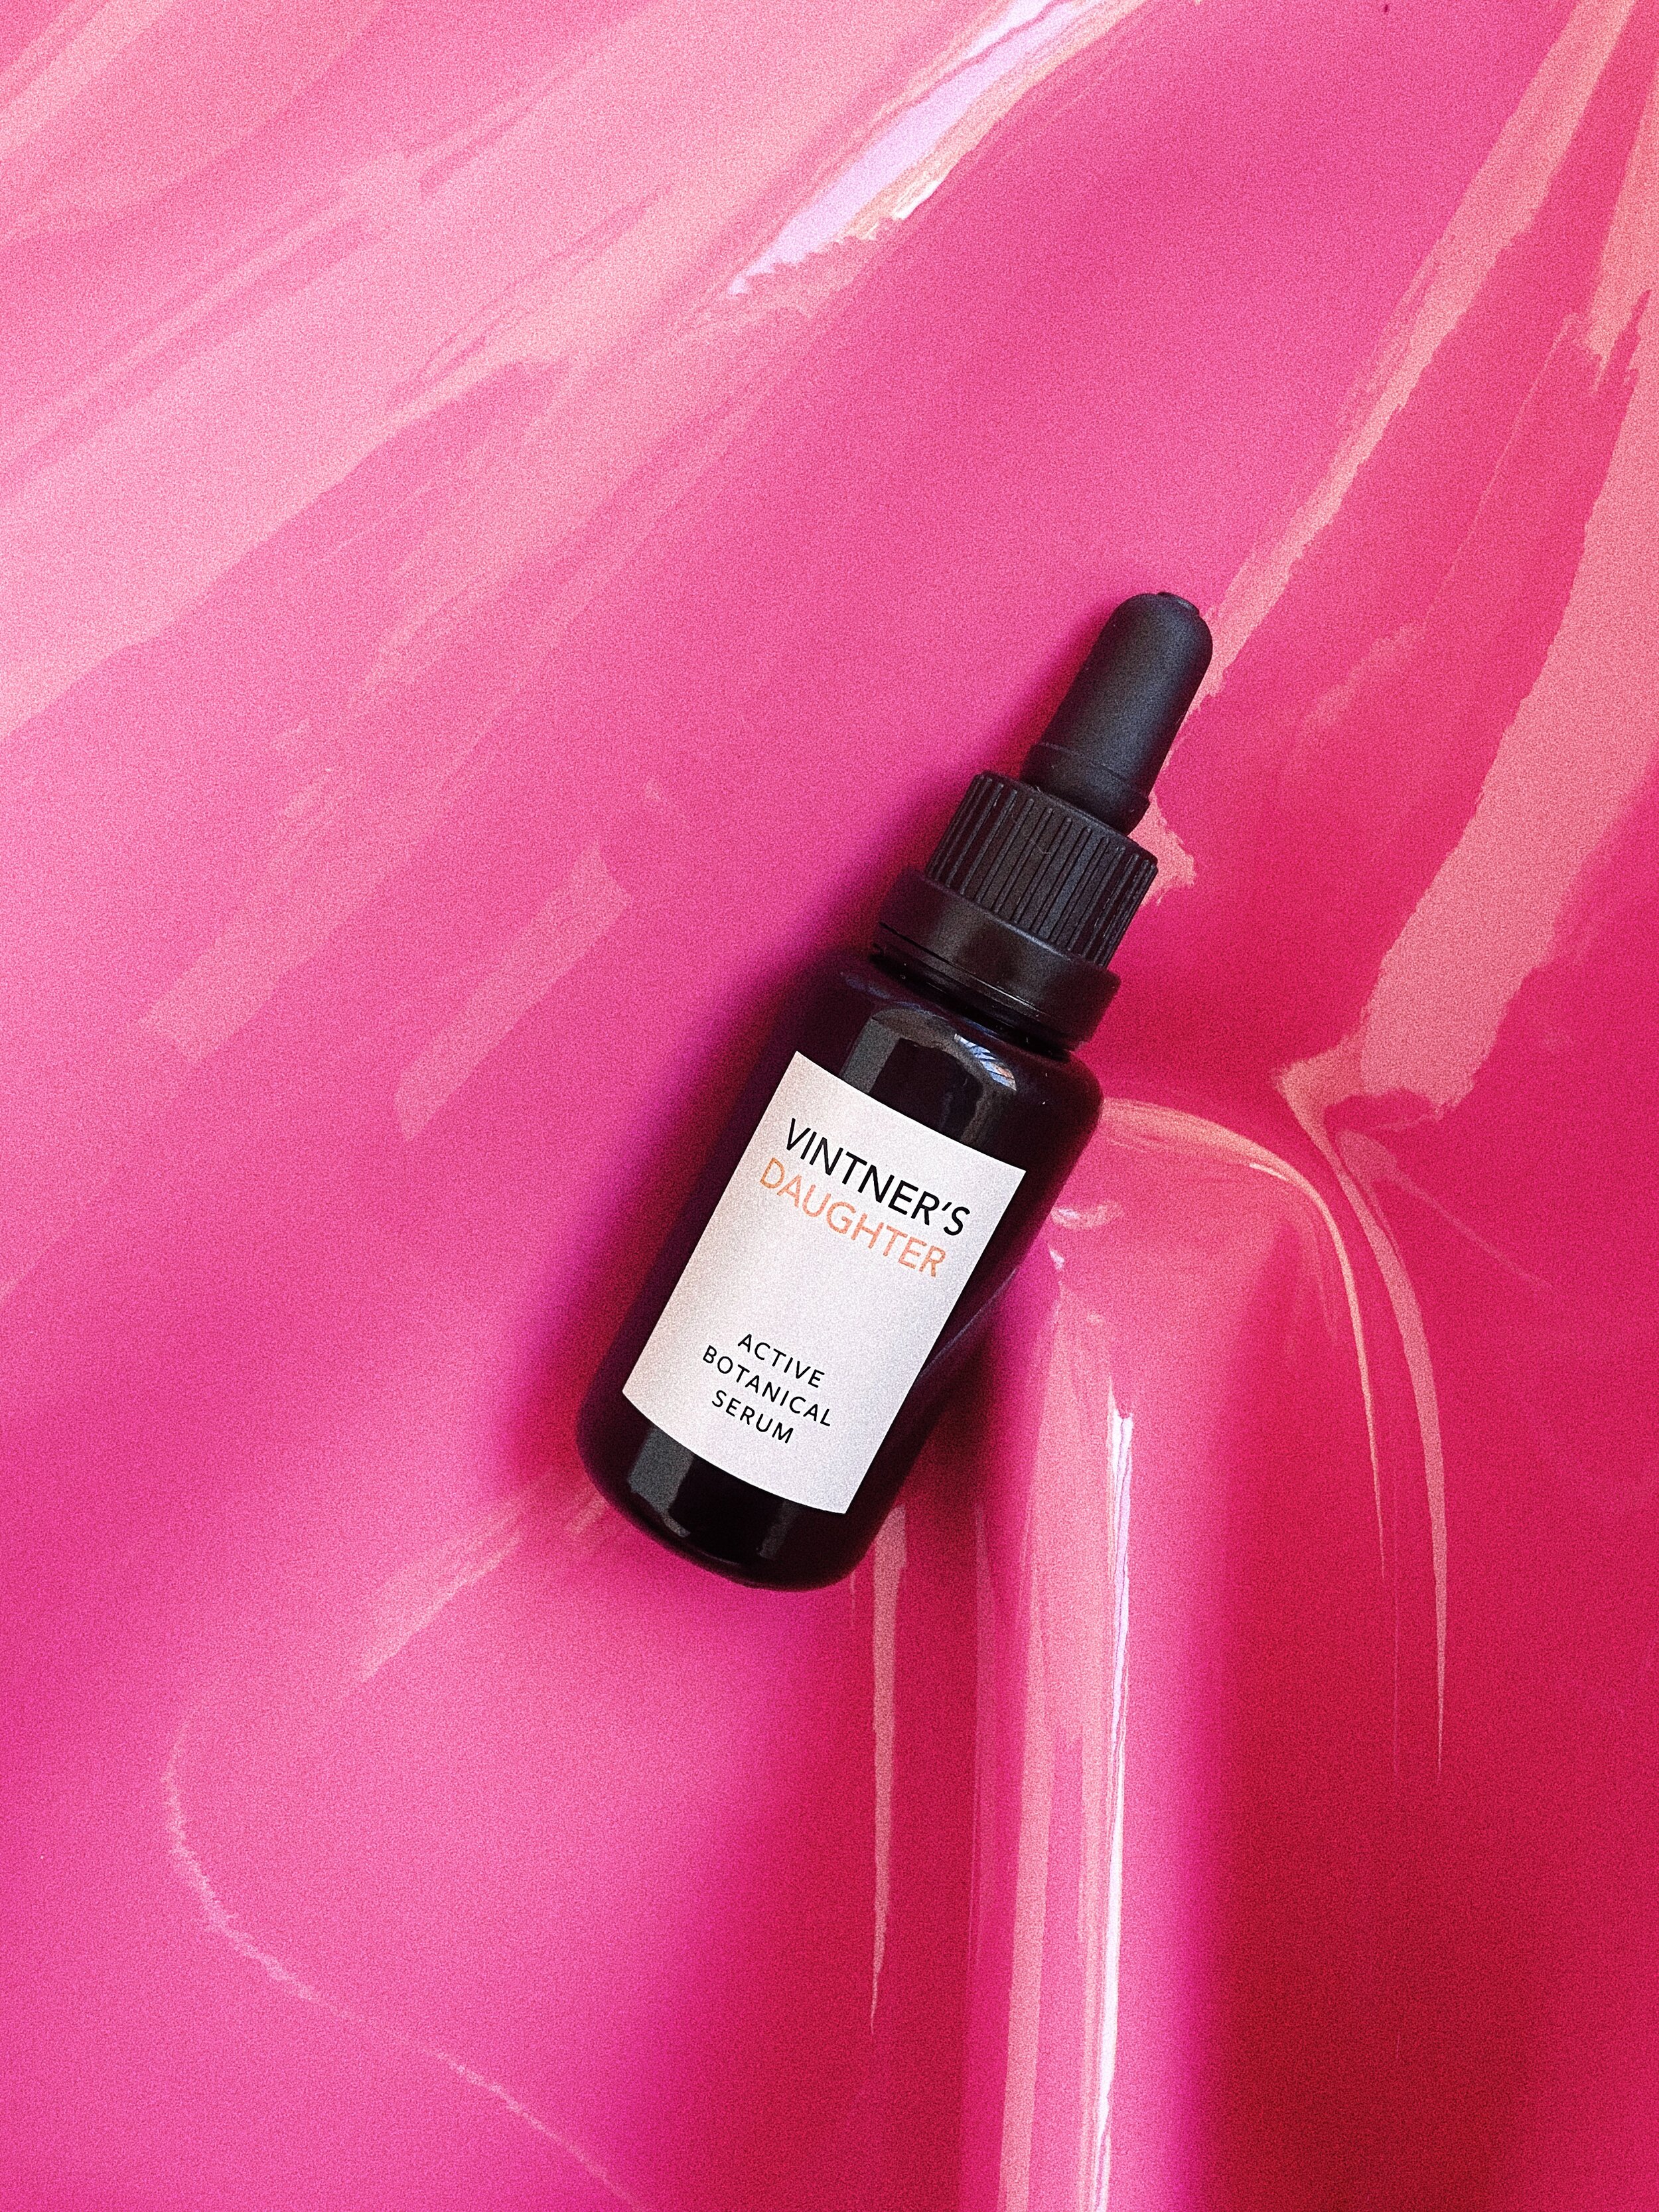 hydrate and treat with a nourishing face oil